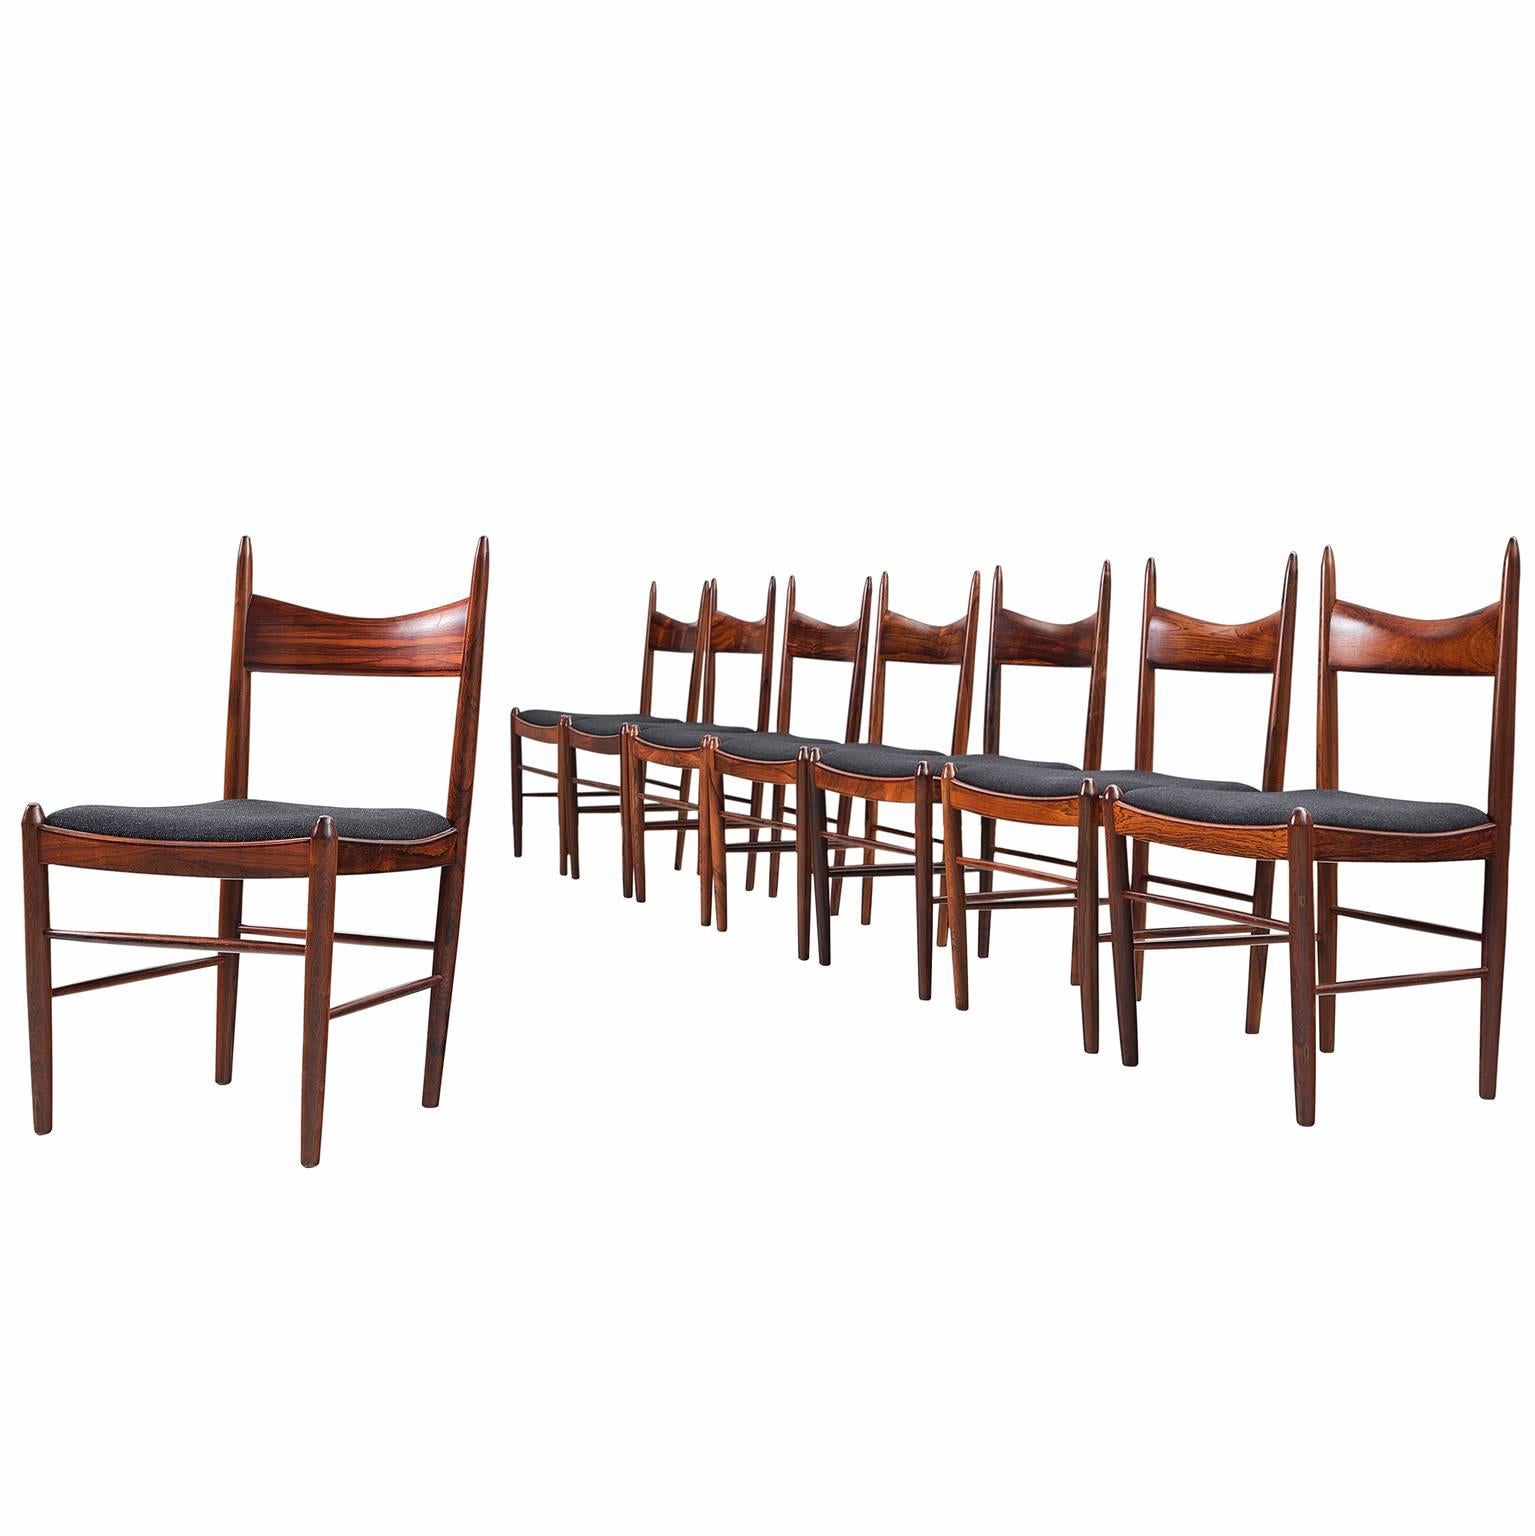 Solid Rosewood Dining Chairs, Denmark, circa 1950